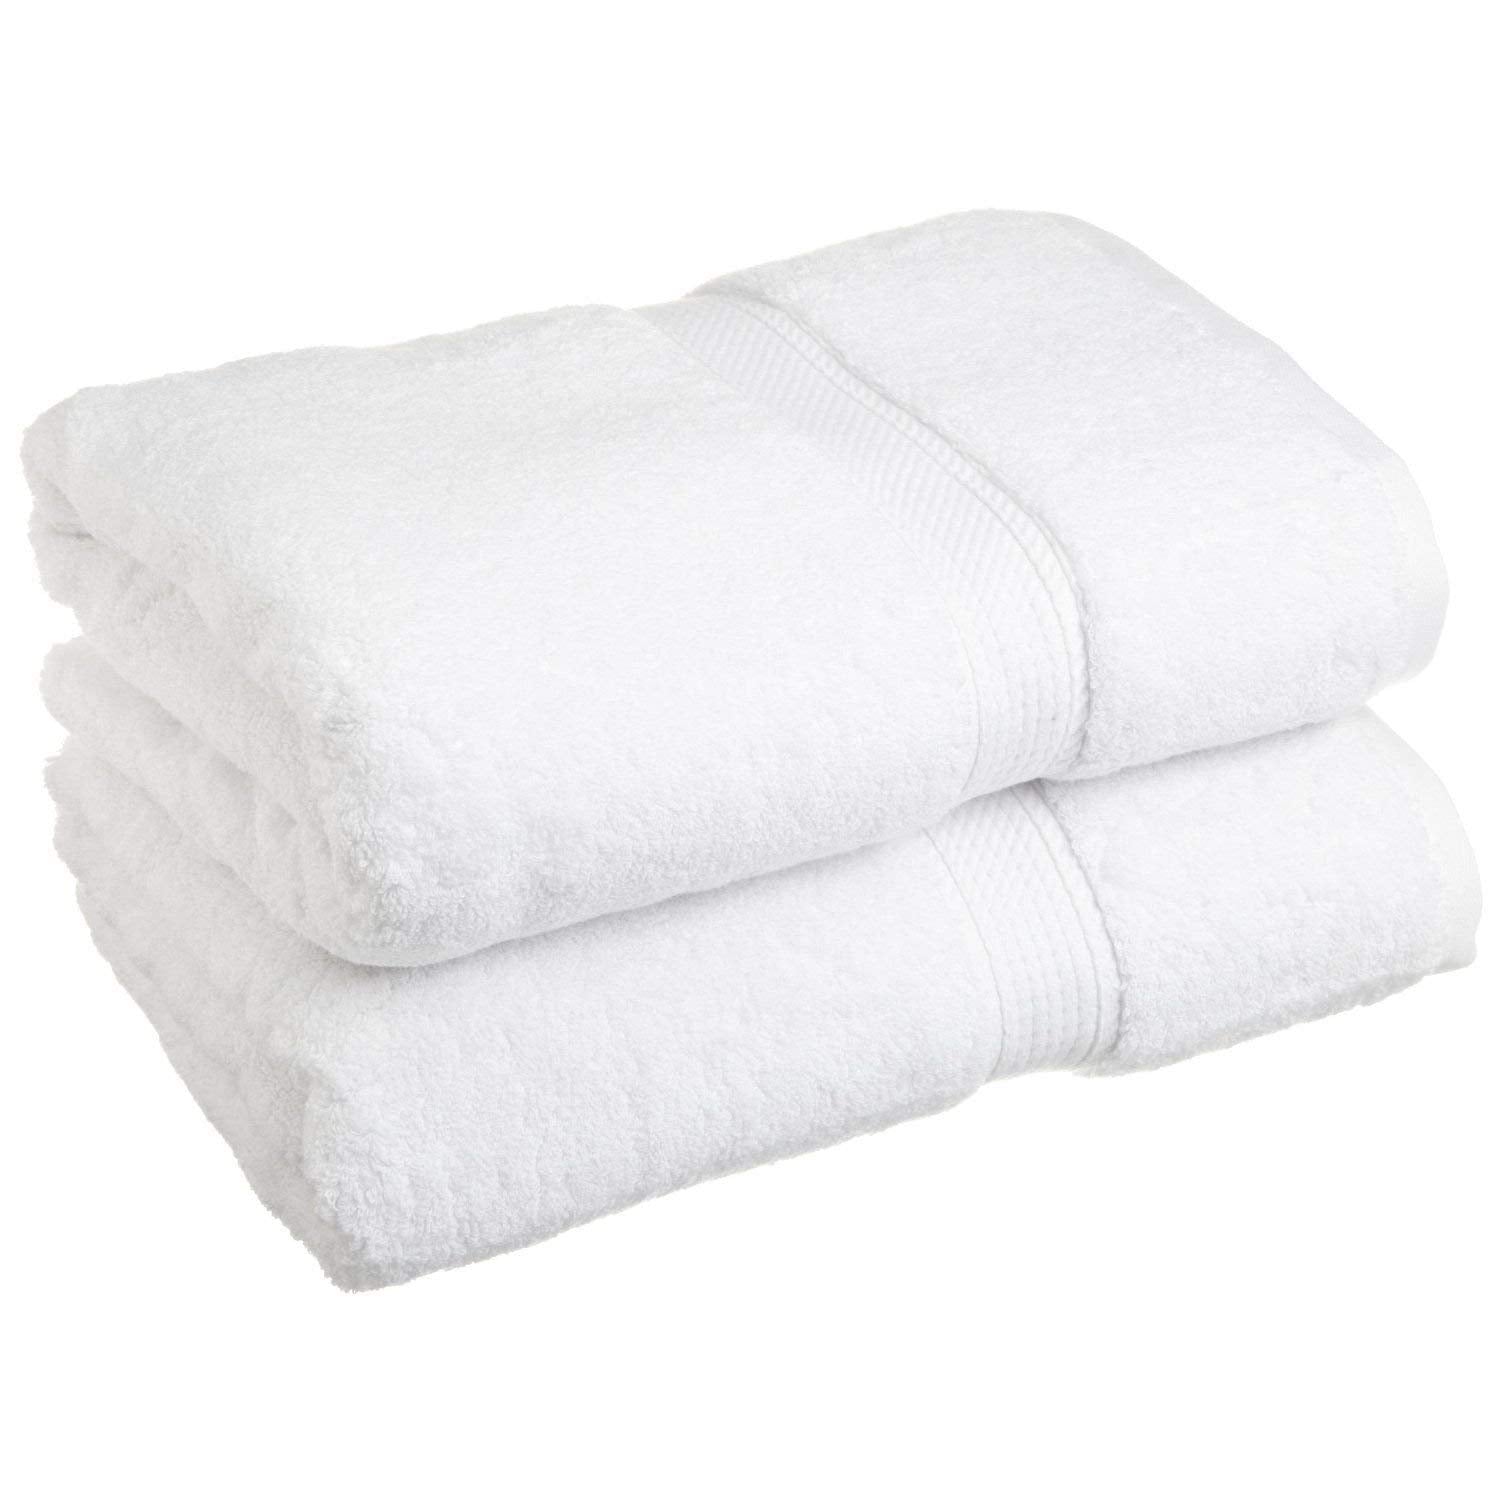 Toro Blu Toro Blu White Bath Towel - Extra Large 155cm x 78cm, 100% Cotton, 500 GSM, Ultra Soft and Highly Absorbent for a Spa-Like Shower Experience-Hotel Towels Toro Blu 999.00 Toro Blu  Toro Blu White Bath Towel - Extra Large 155cm x 78cm, 100% Cotton, 500 GSM, Ultra Soft and Highly Absorbent for a Spa-Like Shower Experience-Hotel Towels